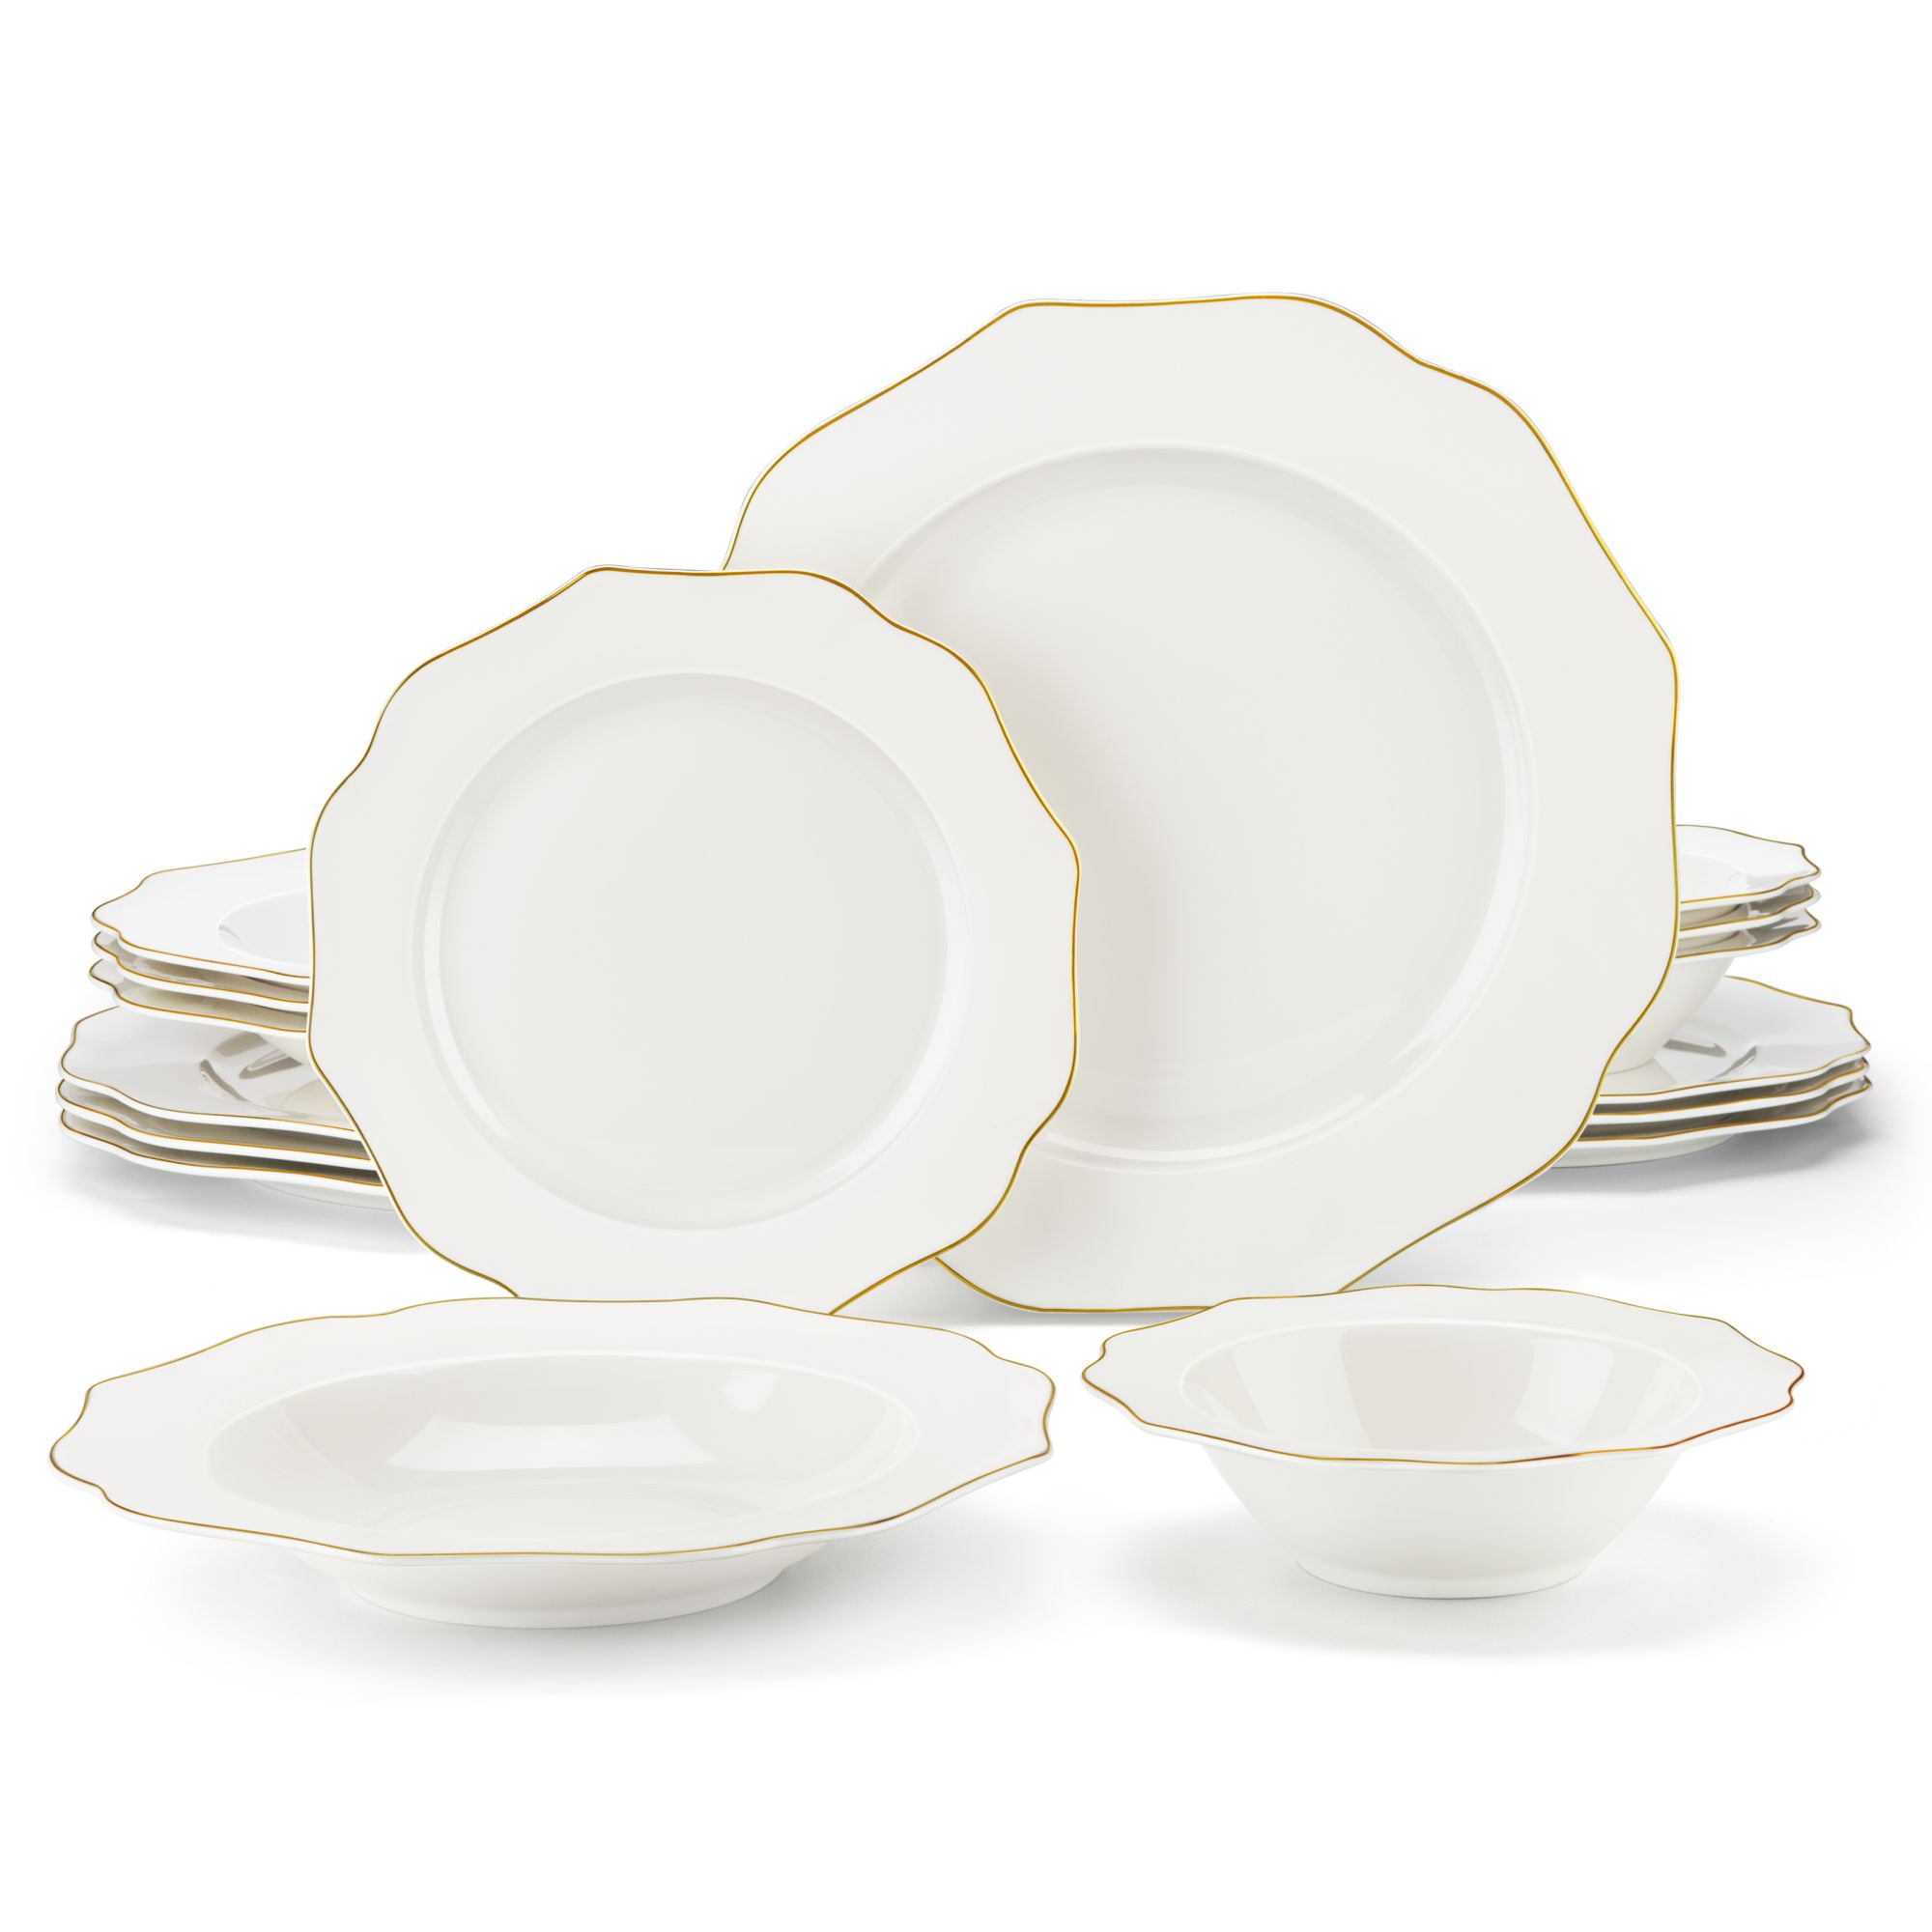 MALACASA Dinnerware Sets, 24-Piece Porcelain Square Dishes - White with  Black Rim, Modern Dish Set for 6 - Plates and Bowls Sets, Ideal for  Dessert